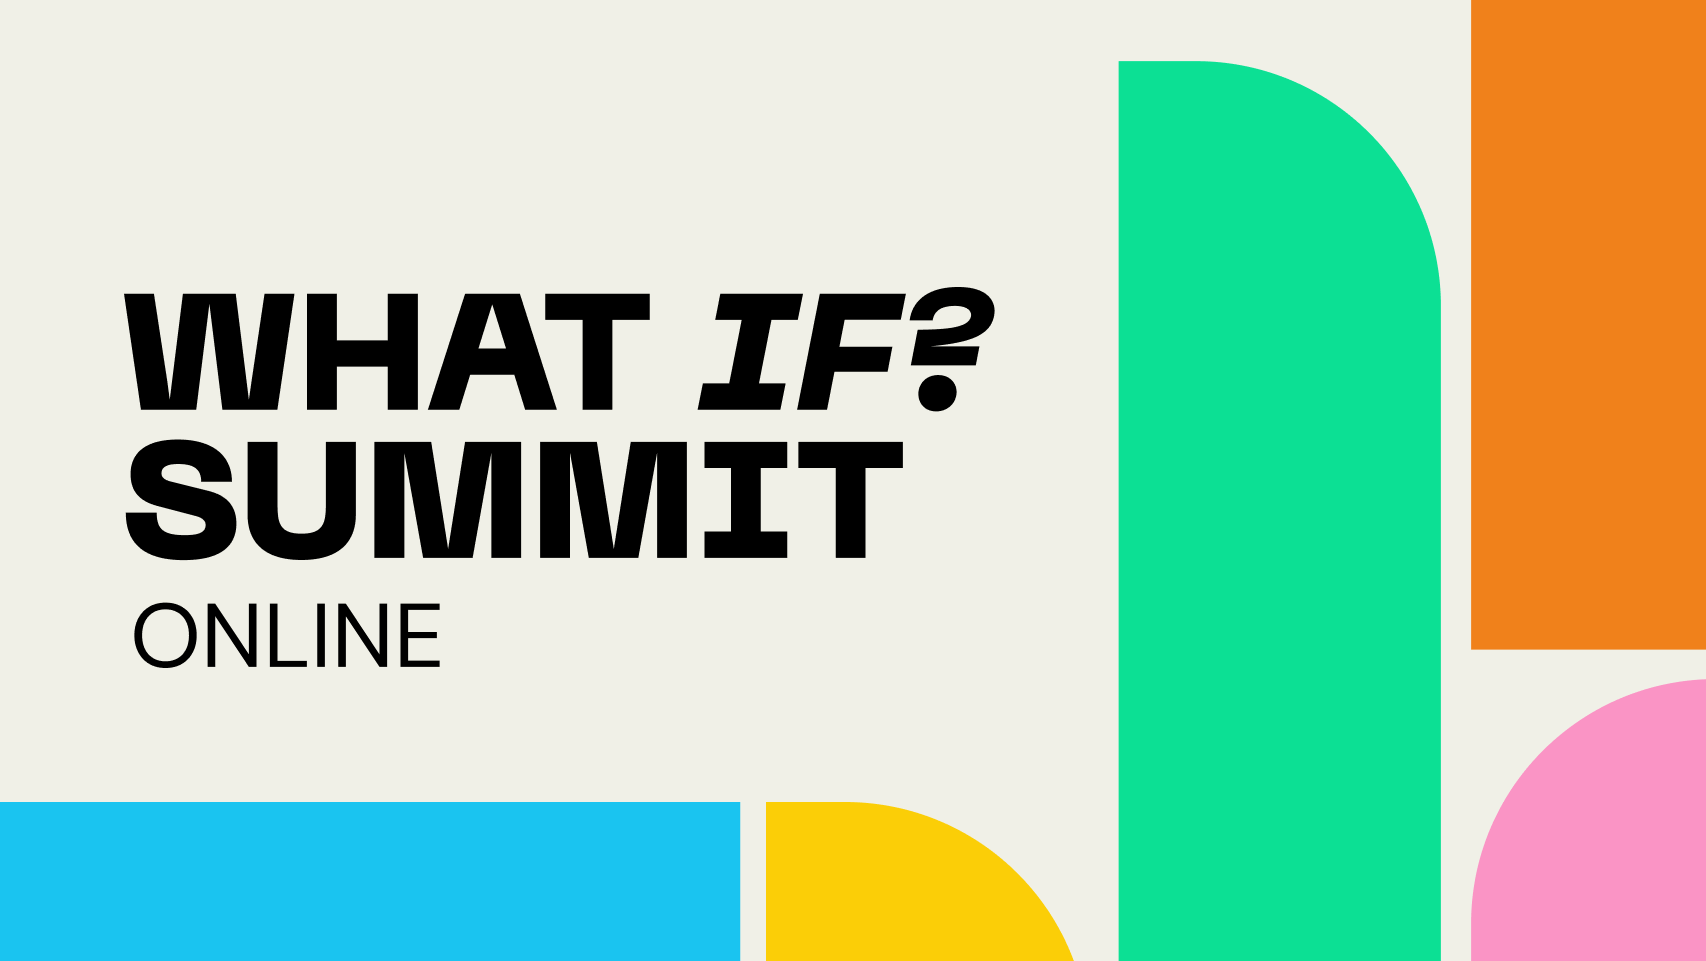 What IF? summit